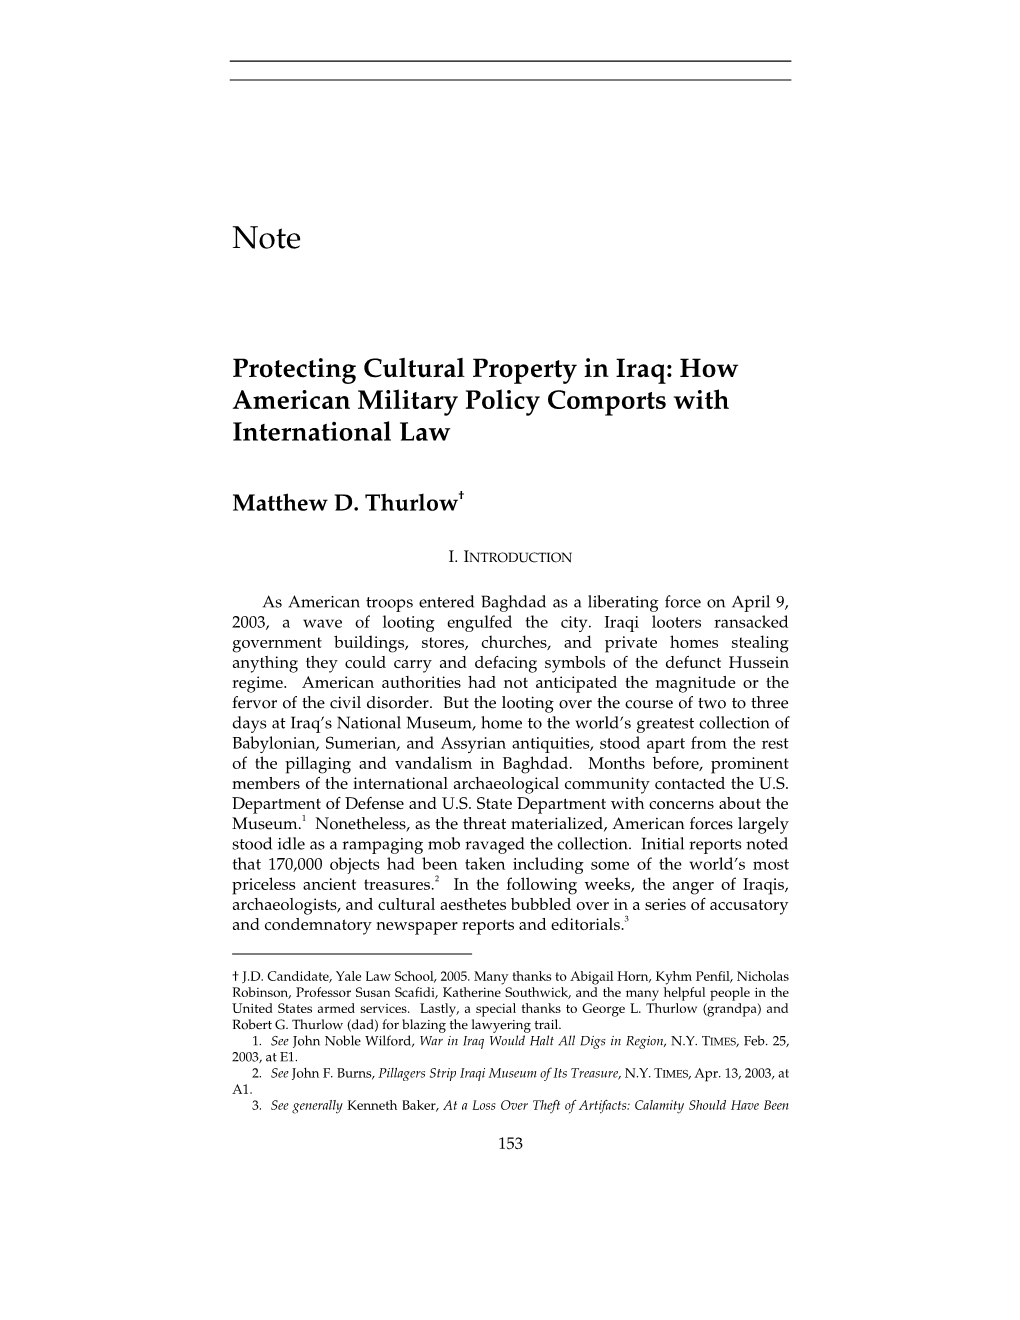 Protecting Cultural Property in Iraq: How American Military Policy Comports with International Law